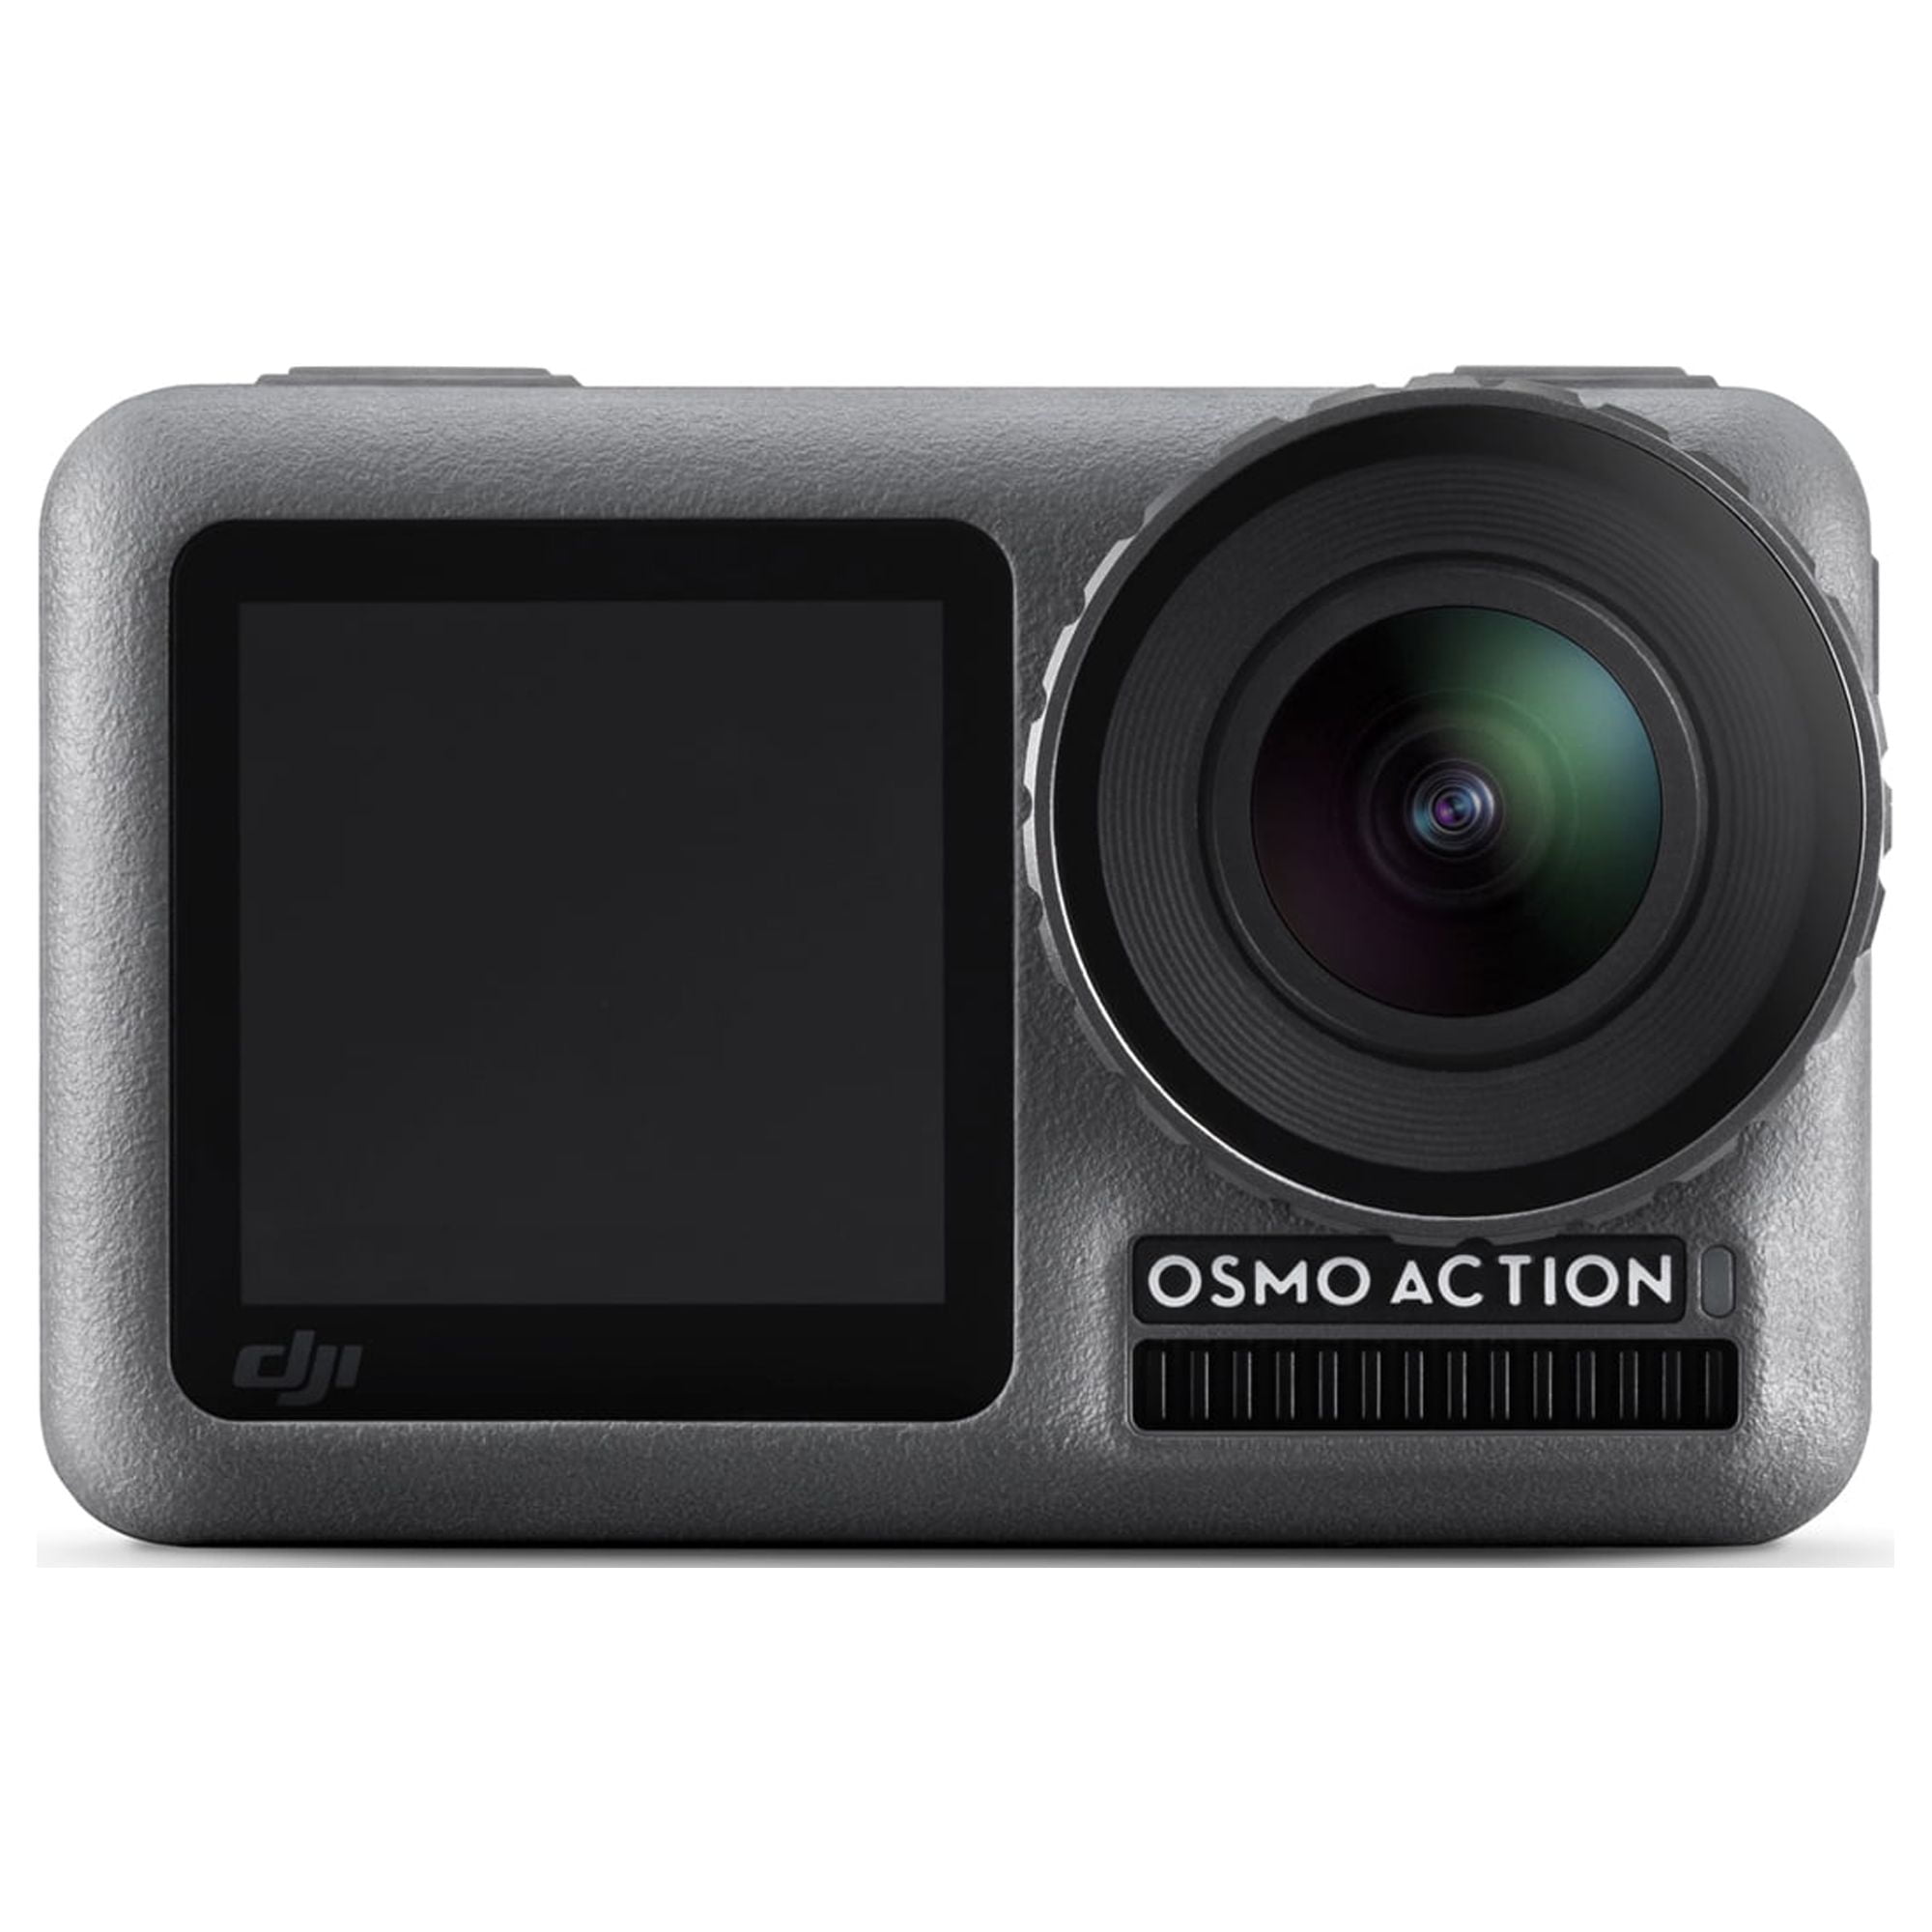 DJI Osmo Action 4 Adventure Combo - 4K/120fps Waterproof Action Camera with  a 1/1.3-Inch Sensor, 10-bit & D-Log M Color Performance, Up to 7.5 h with